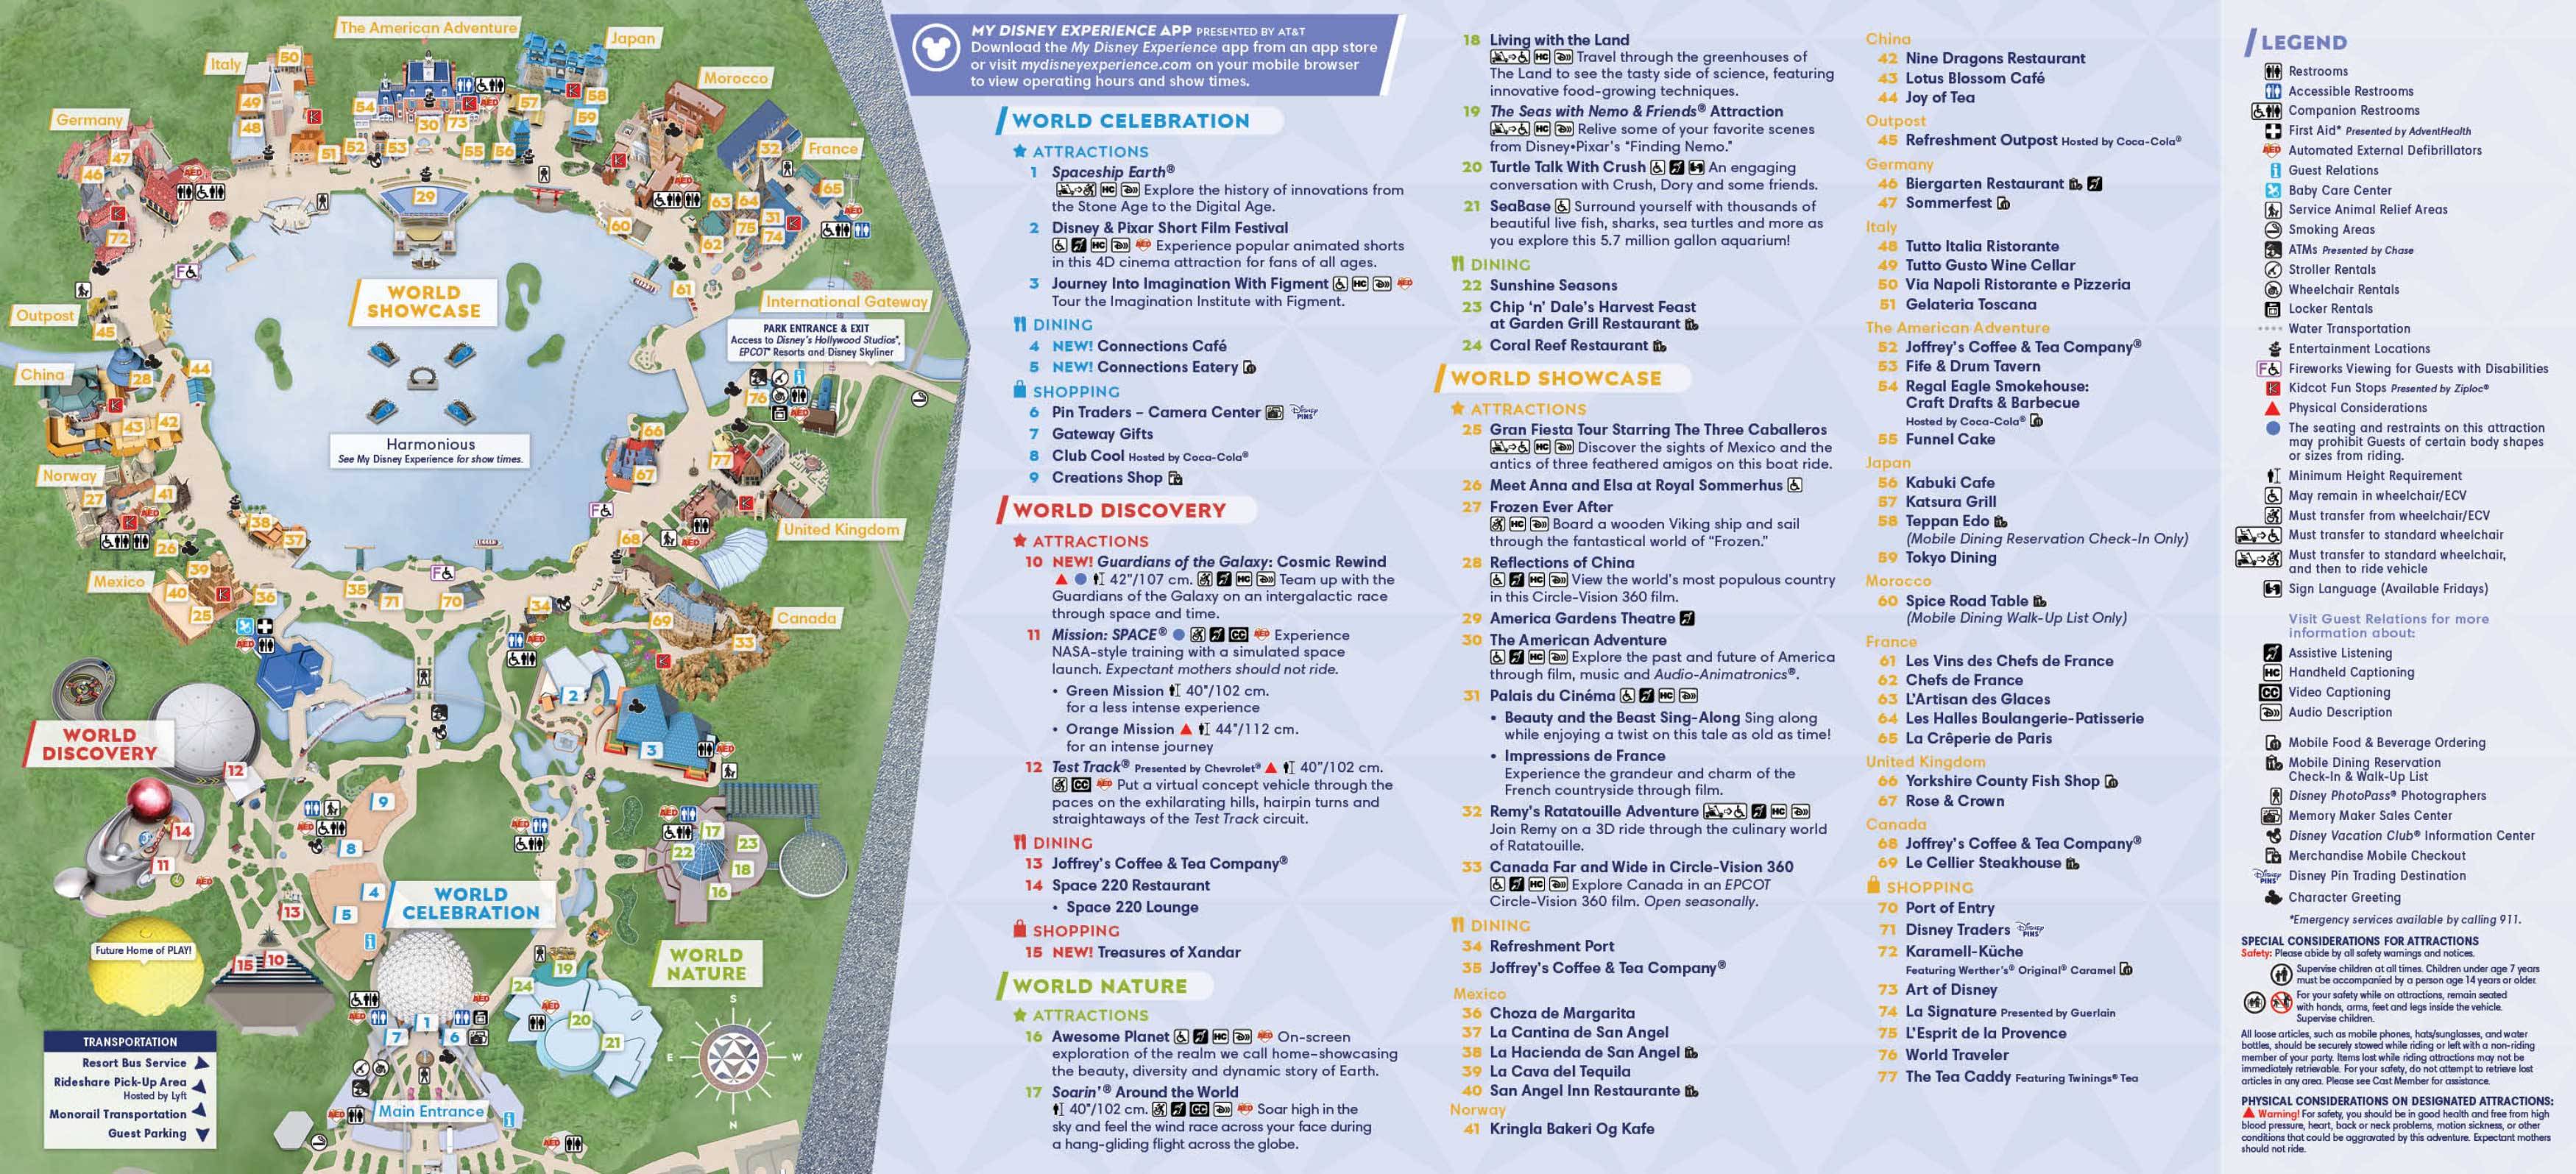 New guide map for EPCOT highlights Guardians of the Galaxy Cosmic Rewind and Connections Cafe and Eatery